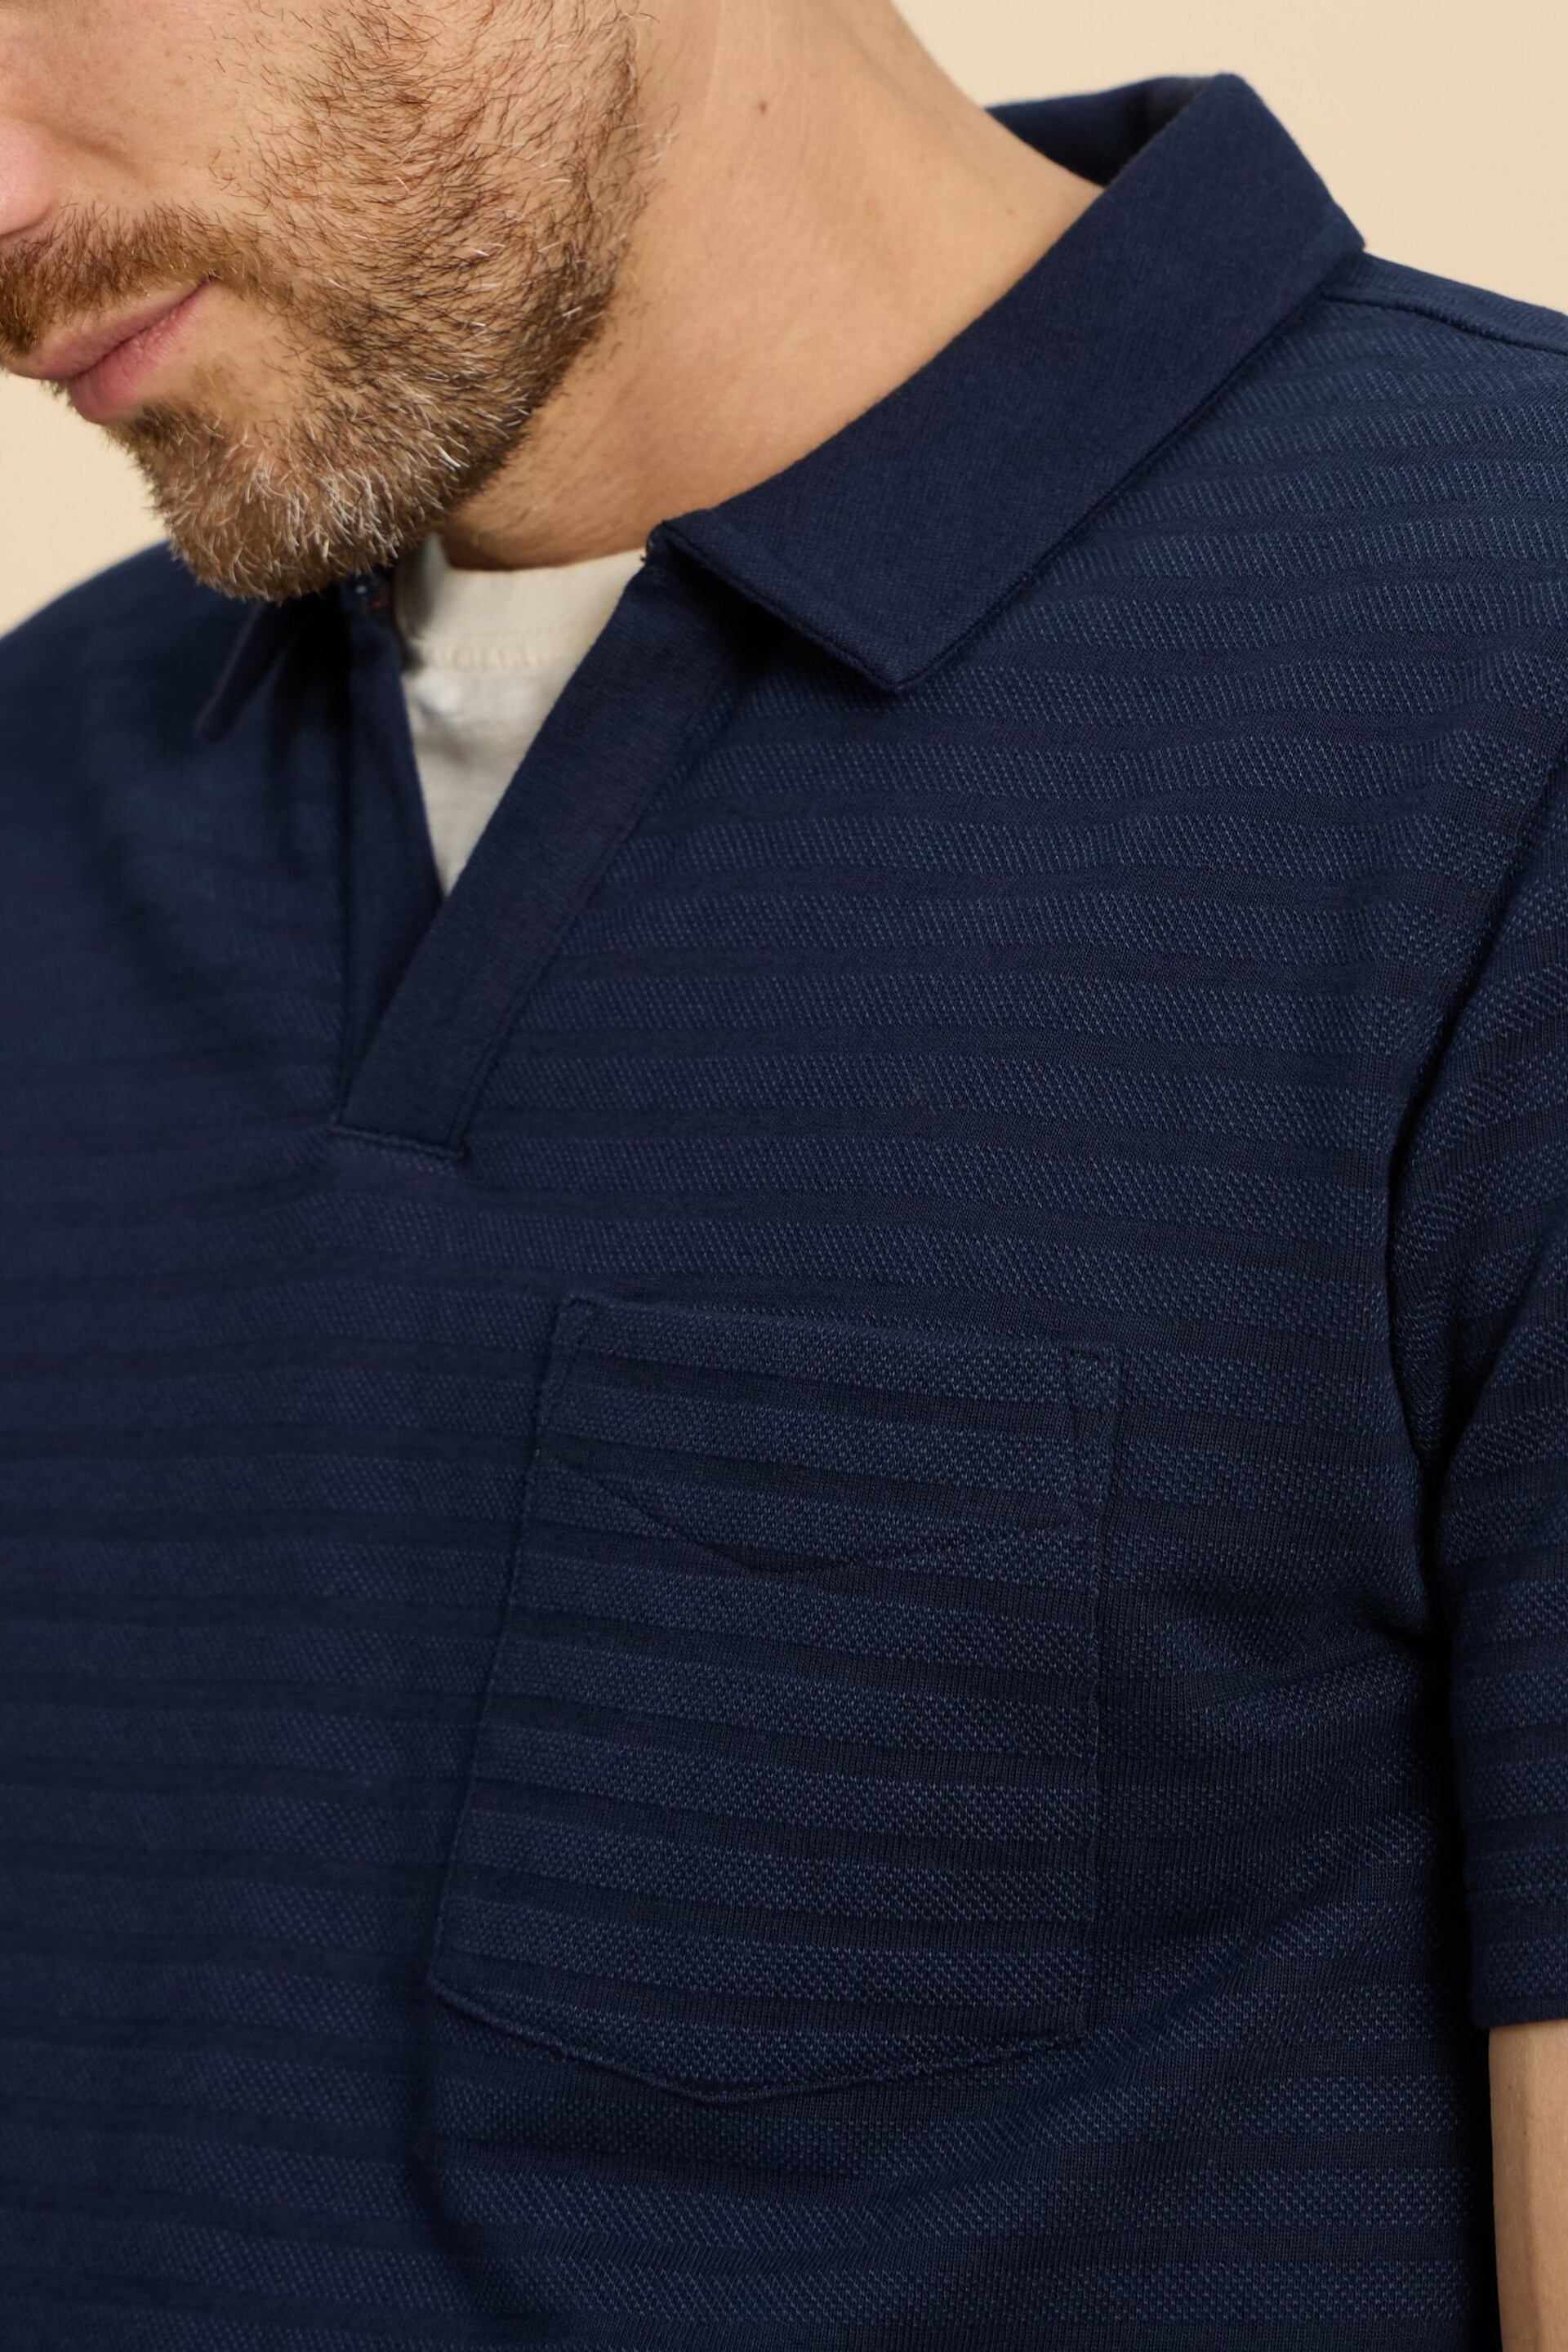 White Stuff Blue Textured Open Collar Polo Shirt - Image 4 of 7